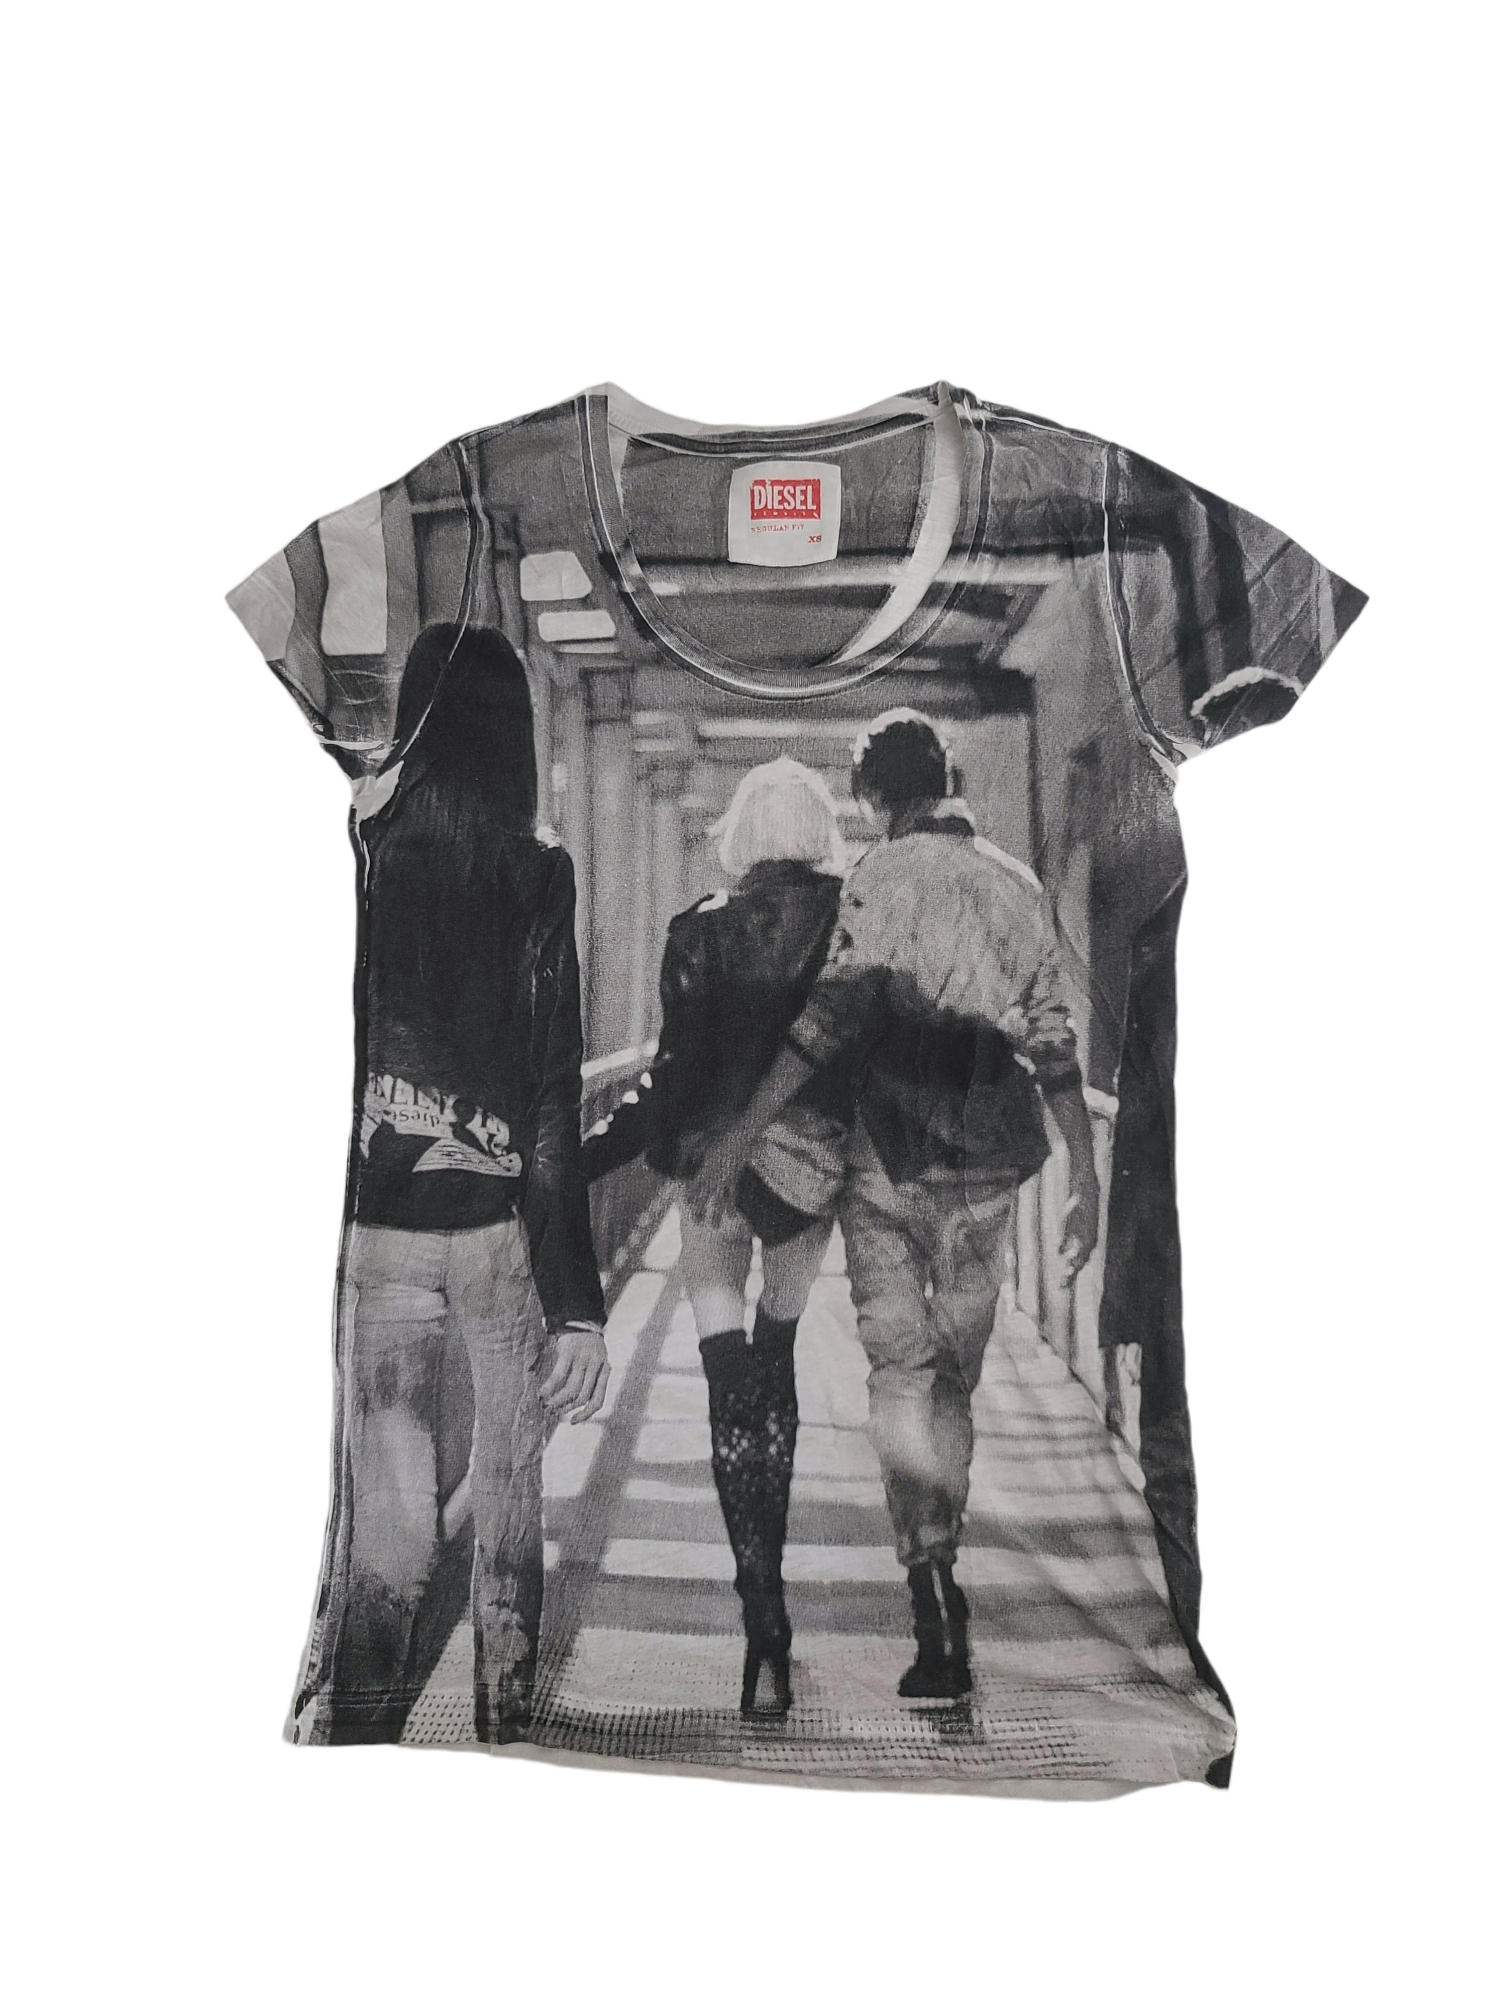 Diesel top y2k cybery2k archive fashion rare collector diesel top printed photo black and white